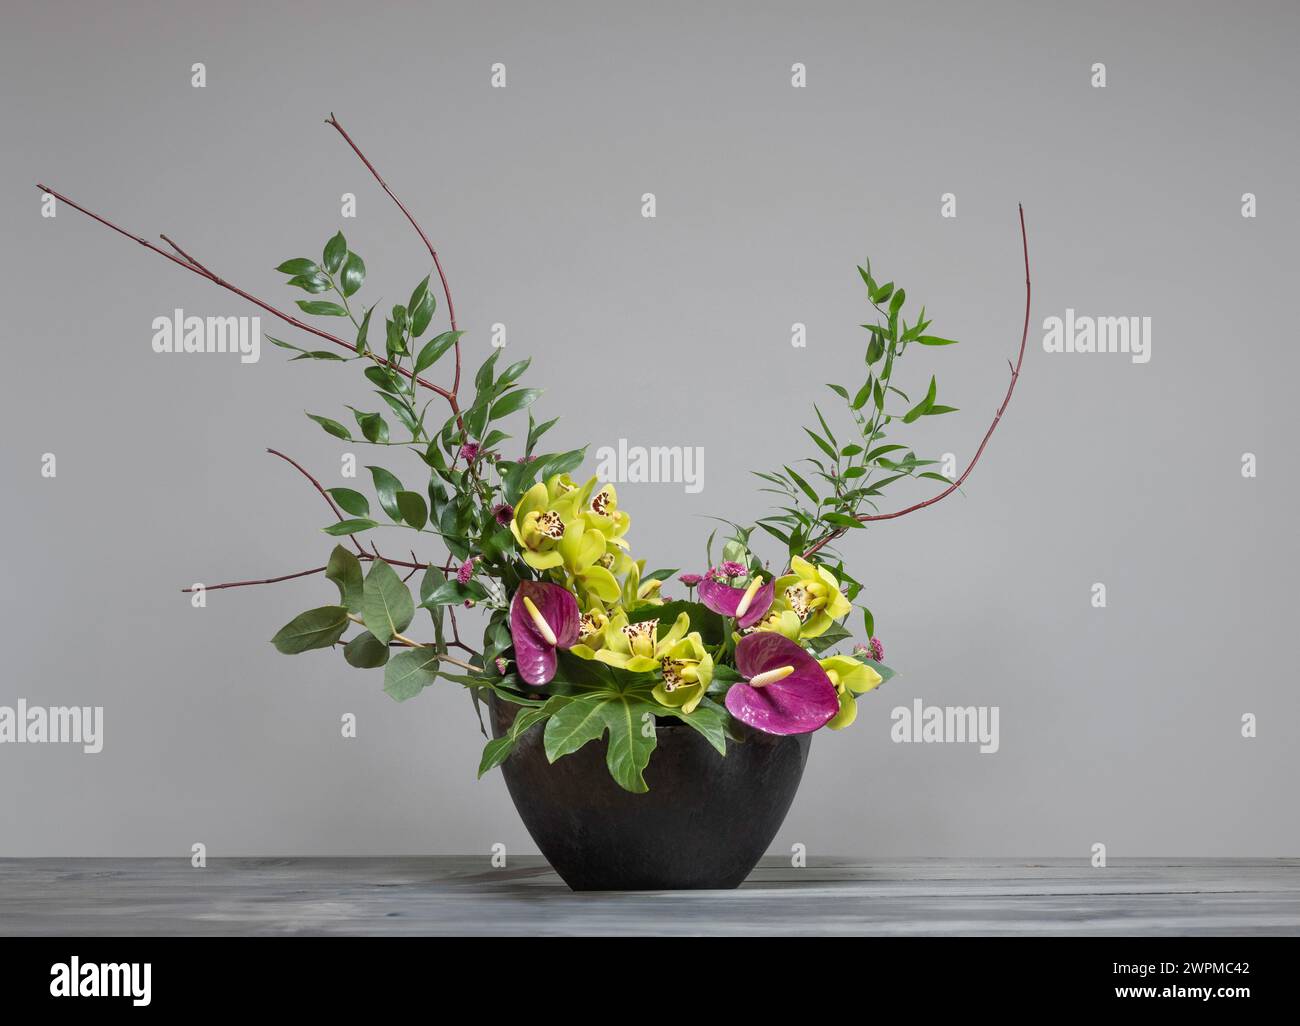 Asymmetrical flower arrangement with magenta anthuriums, lime green cymbidium orchids, foliage and twigs in a grey container on a grey background. Stock Photo